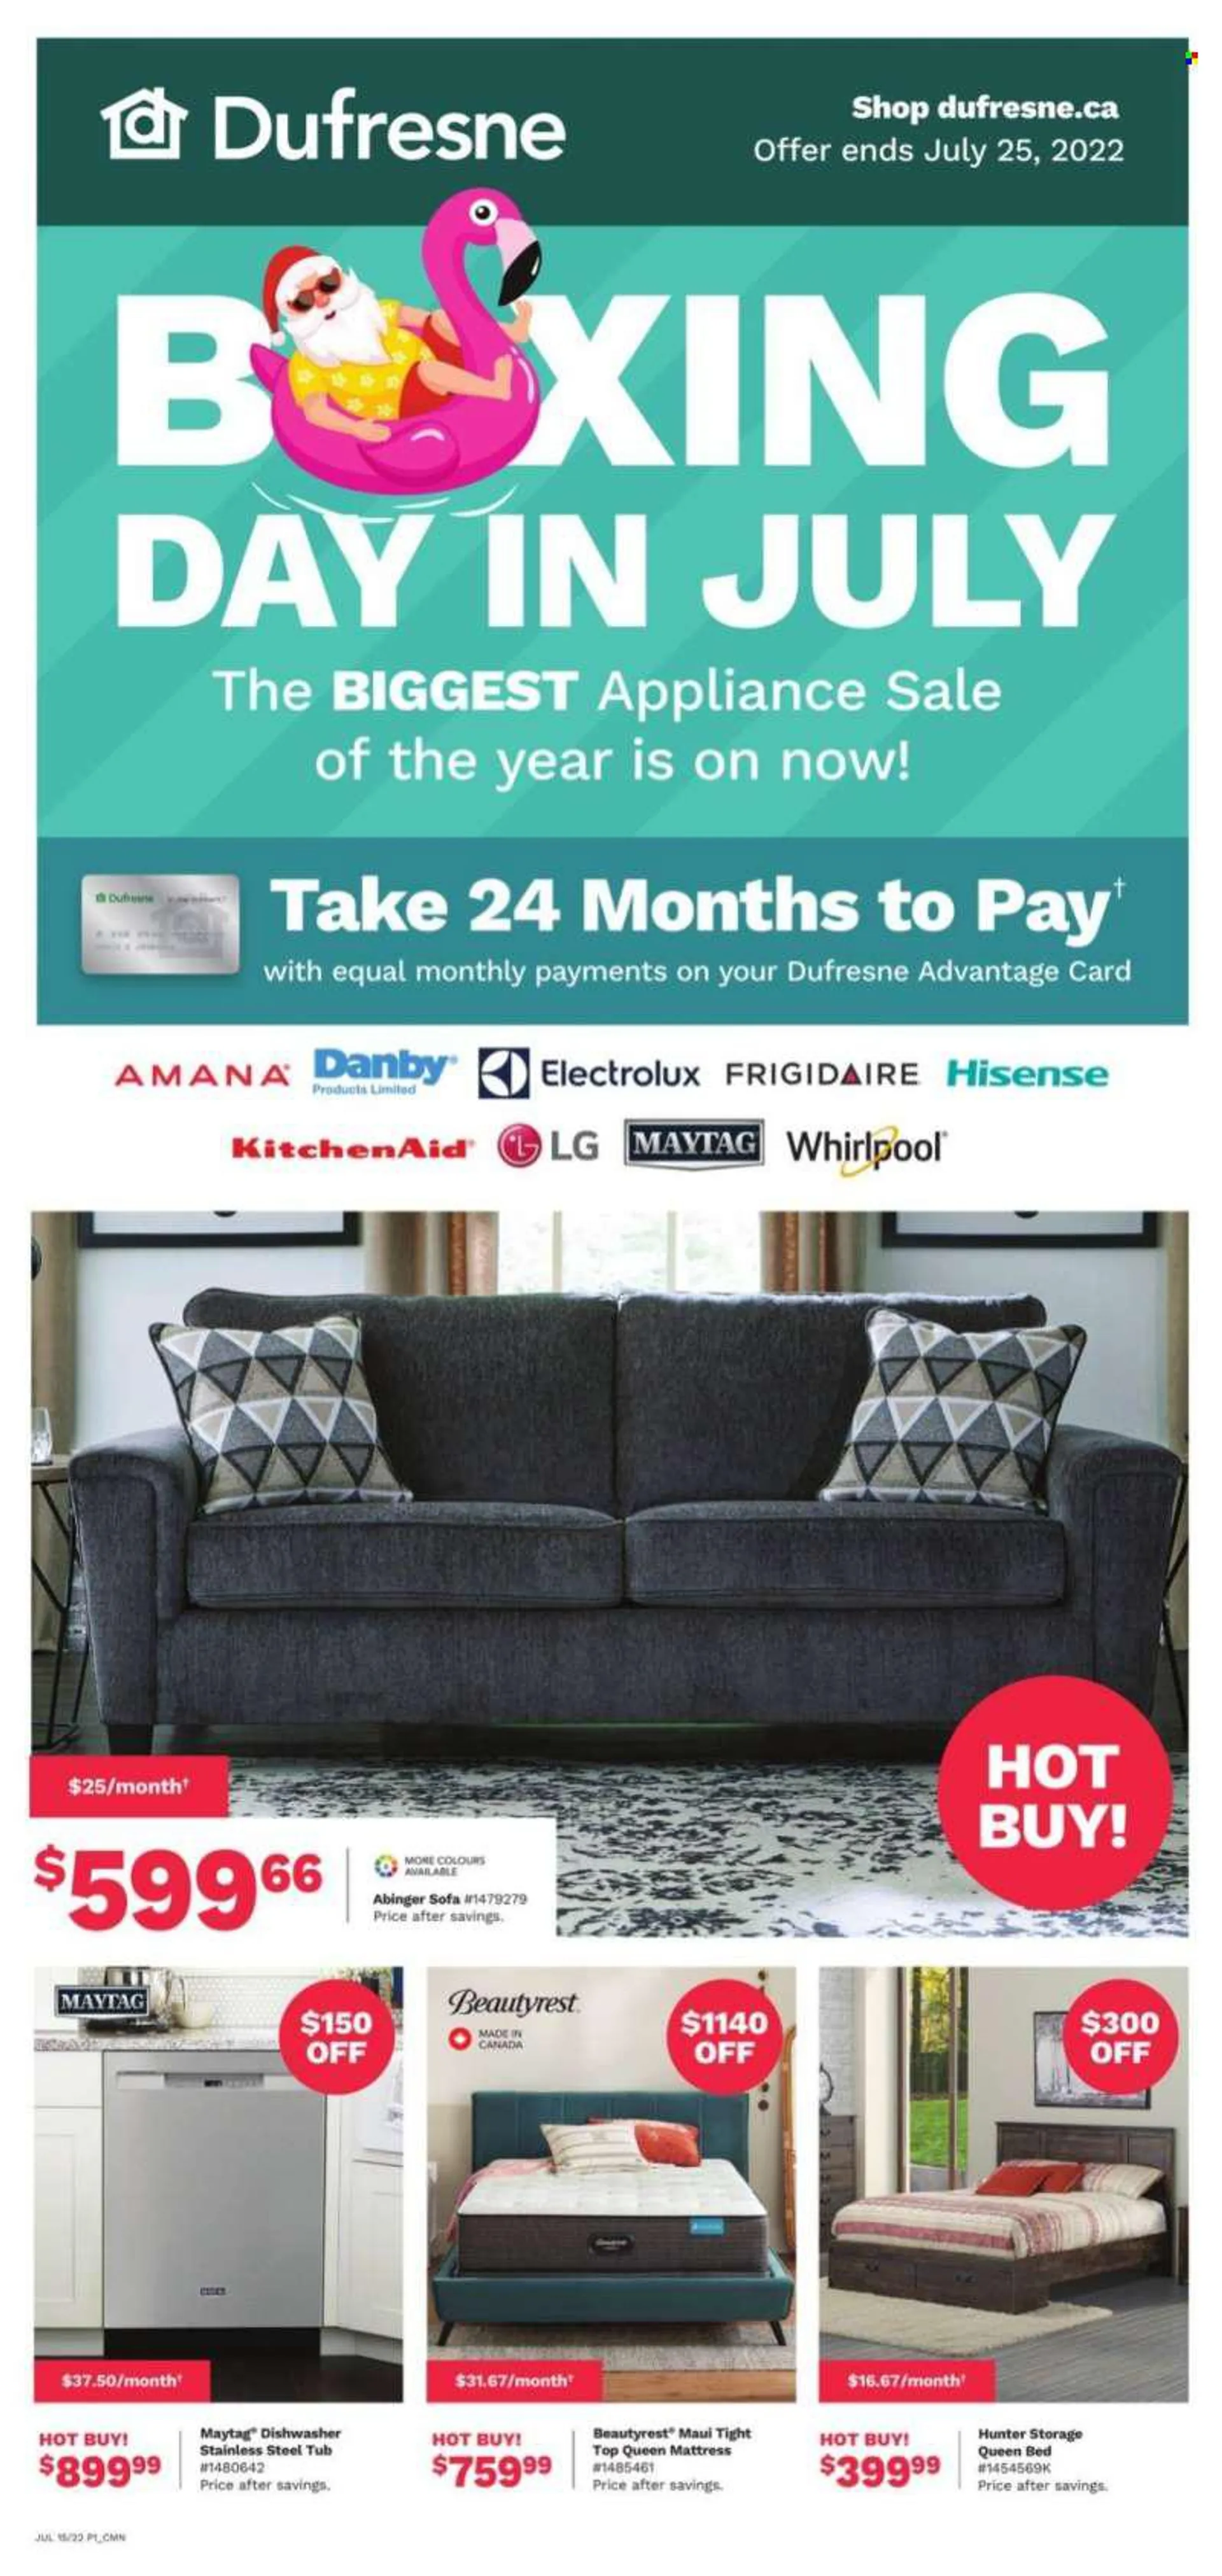 Dufresne Flyer - July 15, 2022 - July 25, 2022 - Sales products - Hisense, Whirlpool, sofa, bed, queen bed, mattress, Electrolux, LG. Page 1.